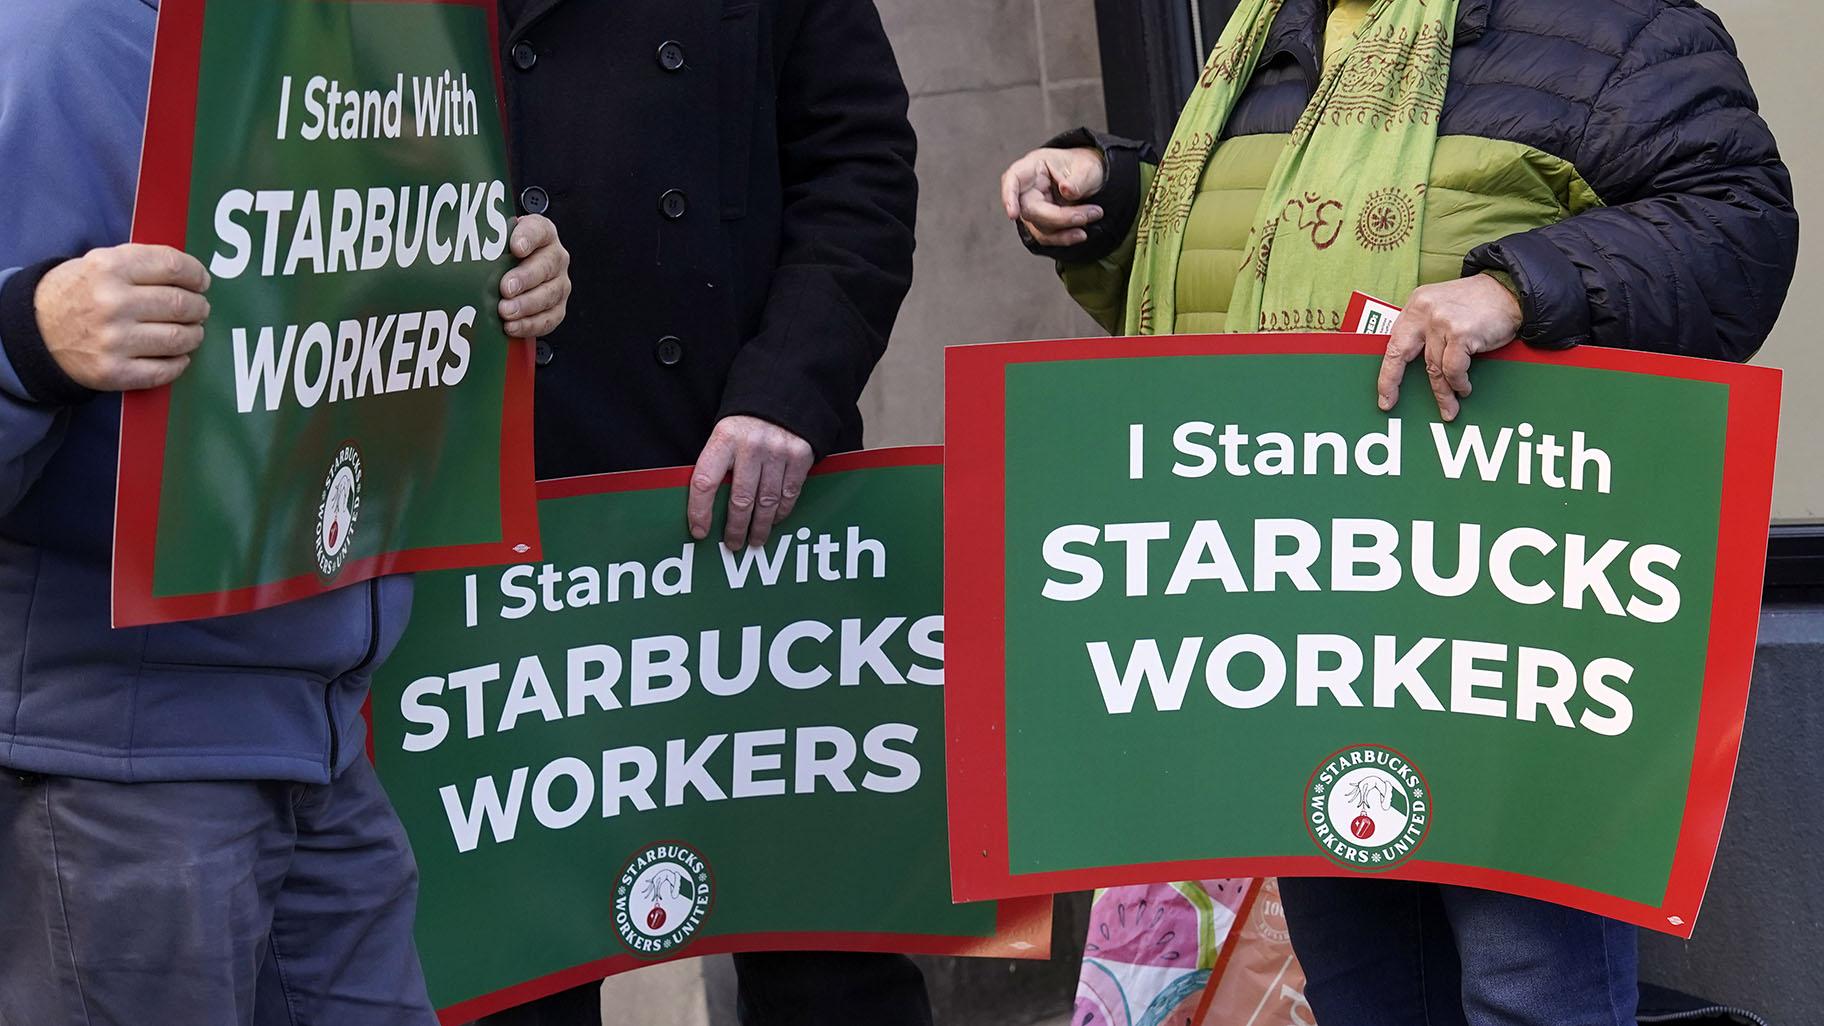 Arlene Geiger, left, holds a sign supporting Starbucks workers outside a Starbucks on New York's Upper West Side, Thursday, Nov. 16, 2023. Thousands of workers at more than 200 U.S. Starbucks stores plan to walk off the job Thursday in what organizers say is the largest strike yet in the two-year-old effort to unionize the company's stores. (AP Photo/Richard Drew)